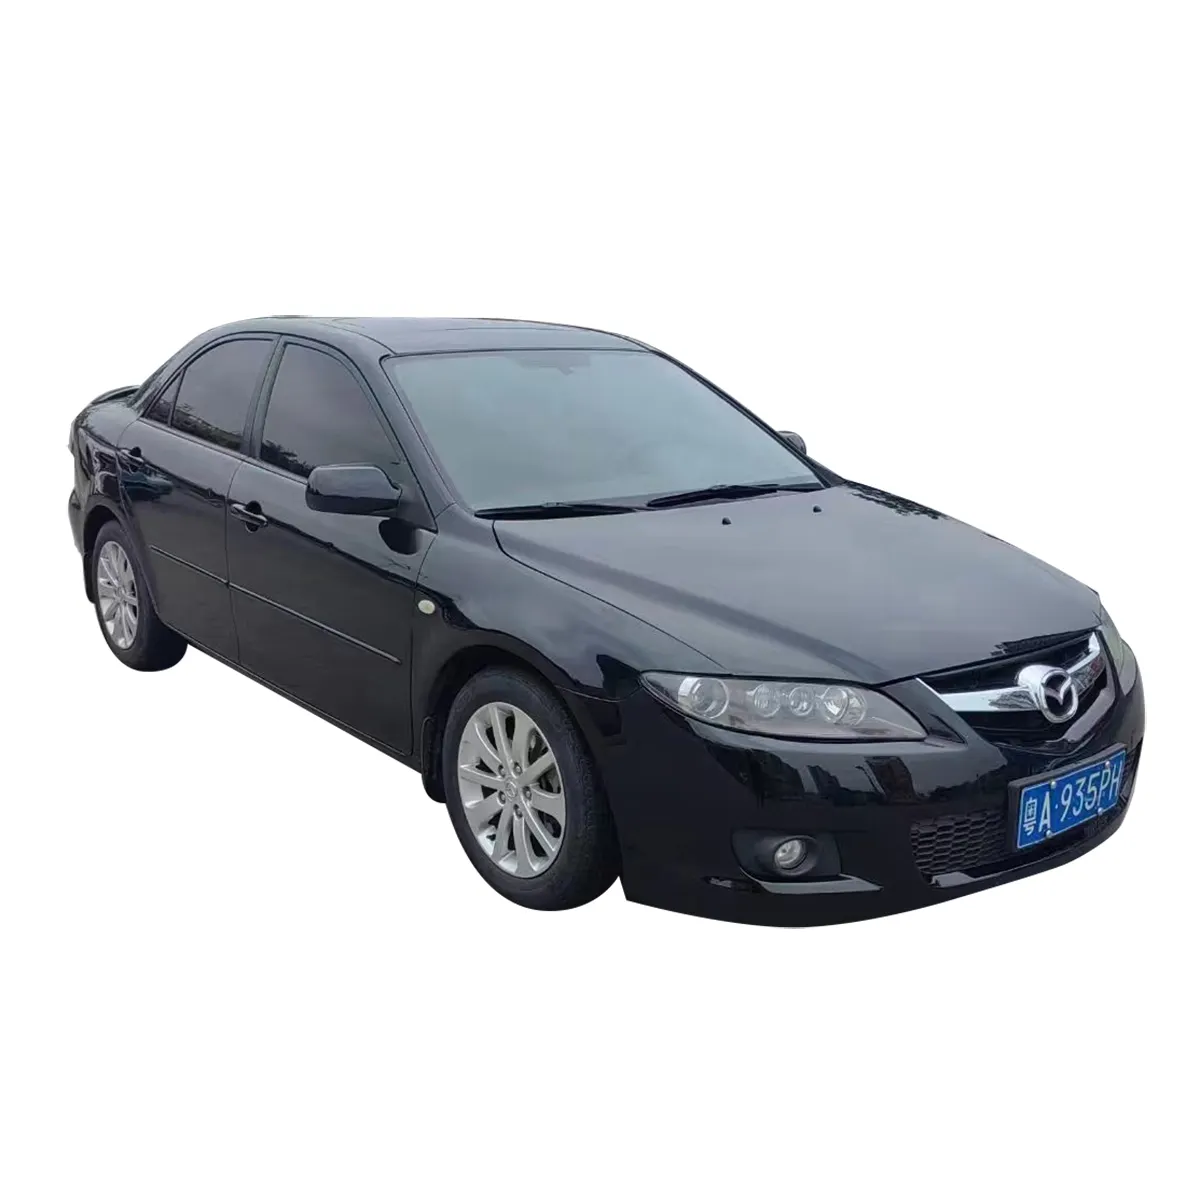 Best price 2007 Mazda6 2.6L automatic used car for sale,second hand suv vehicles cheap cars